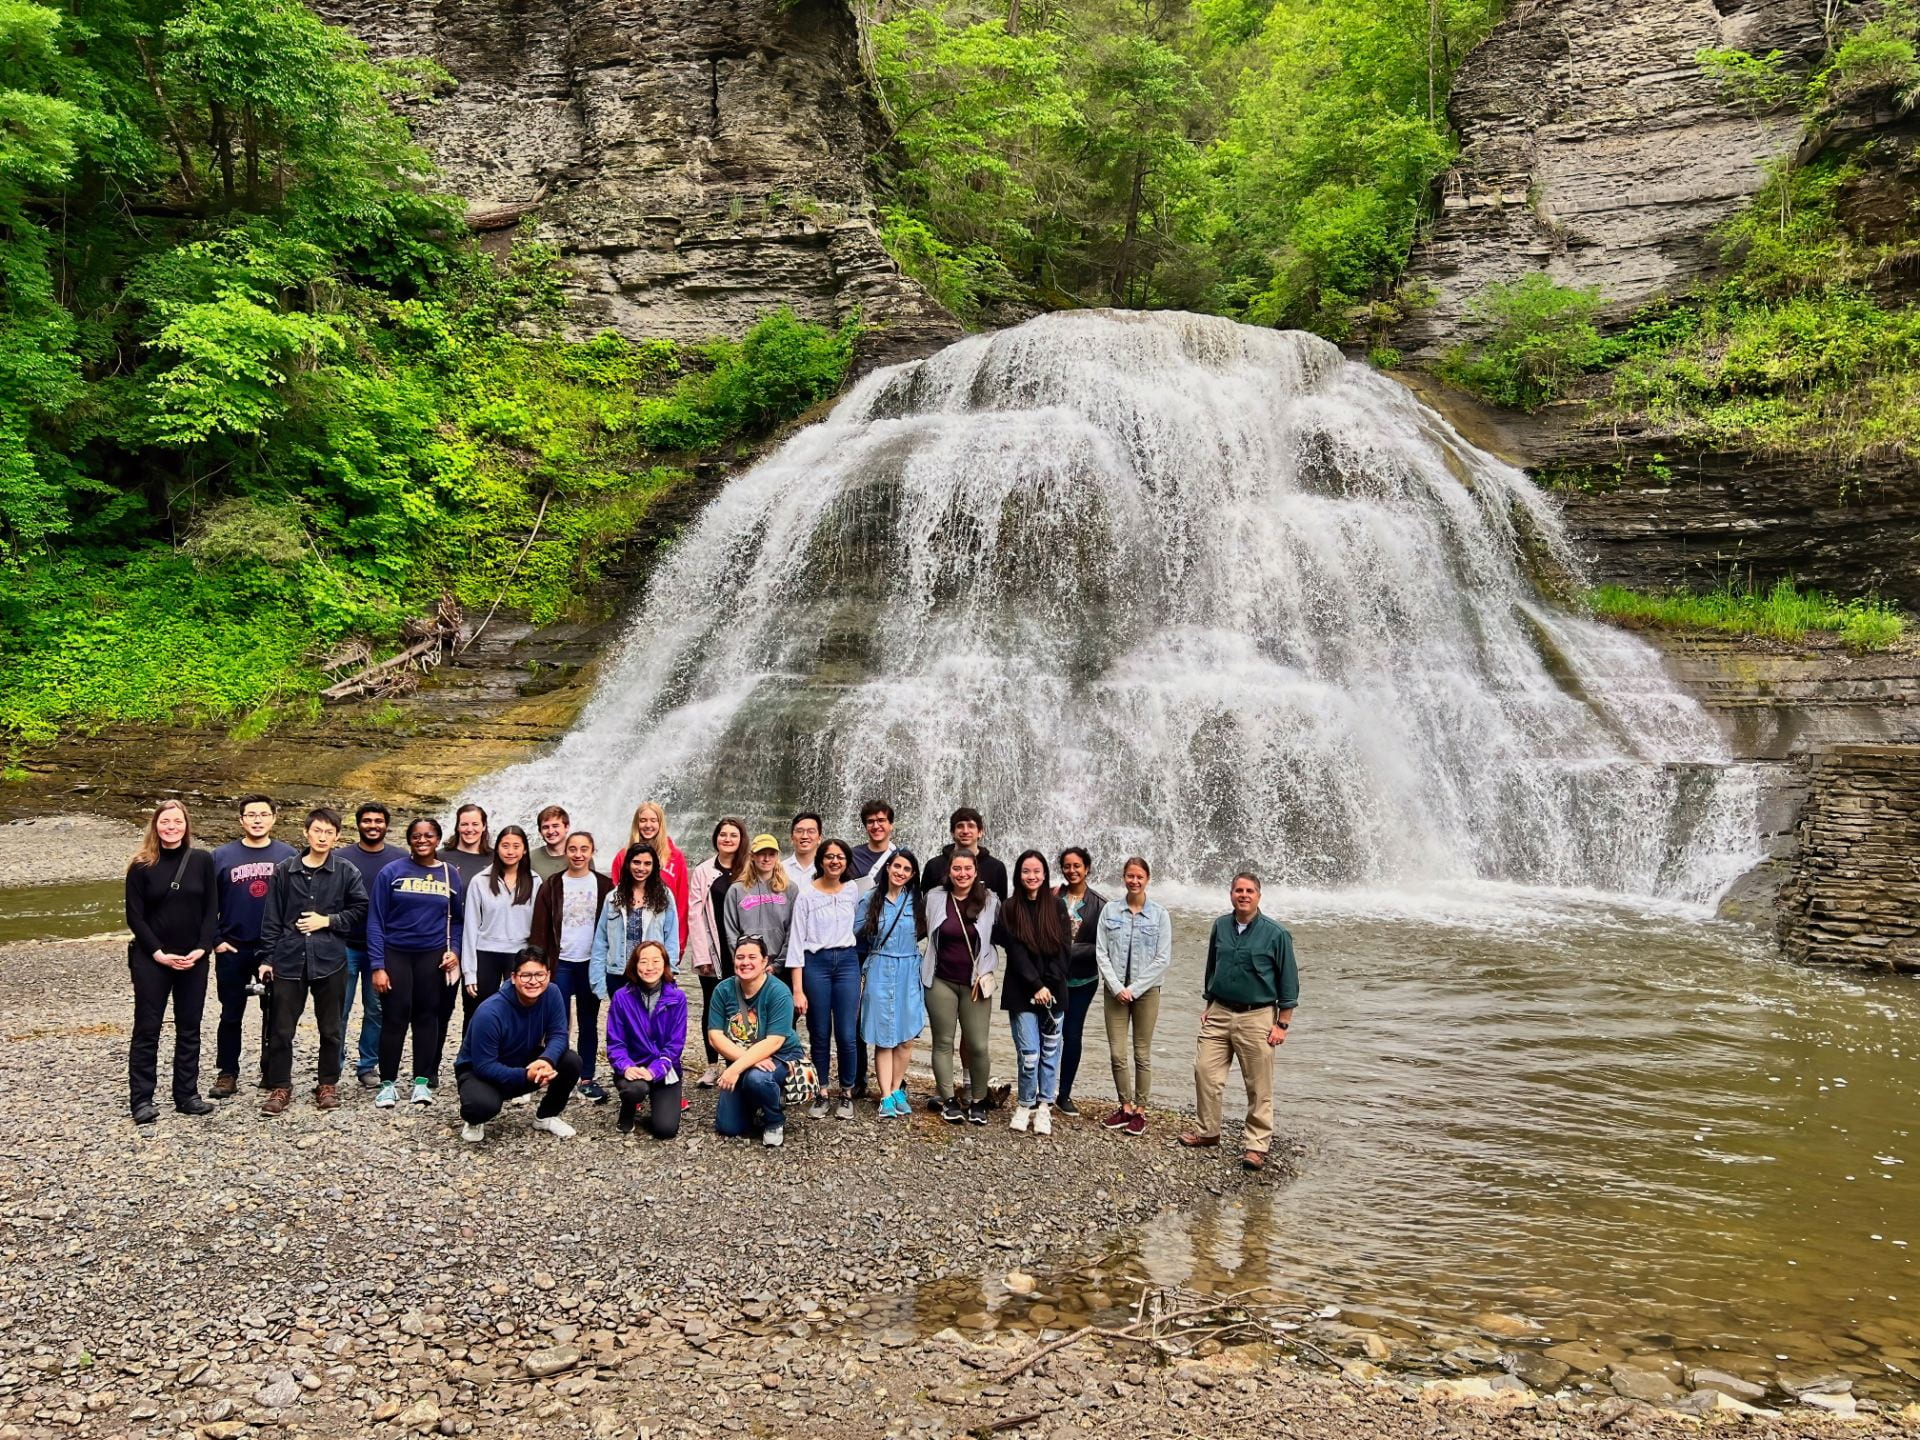 electron microscopy group in front of a waterfall